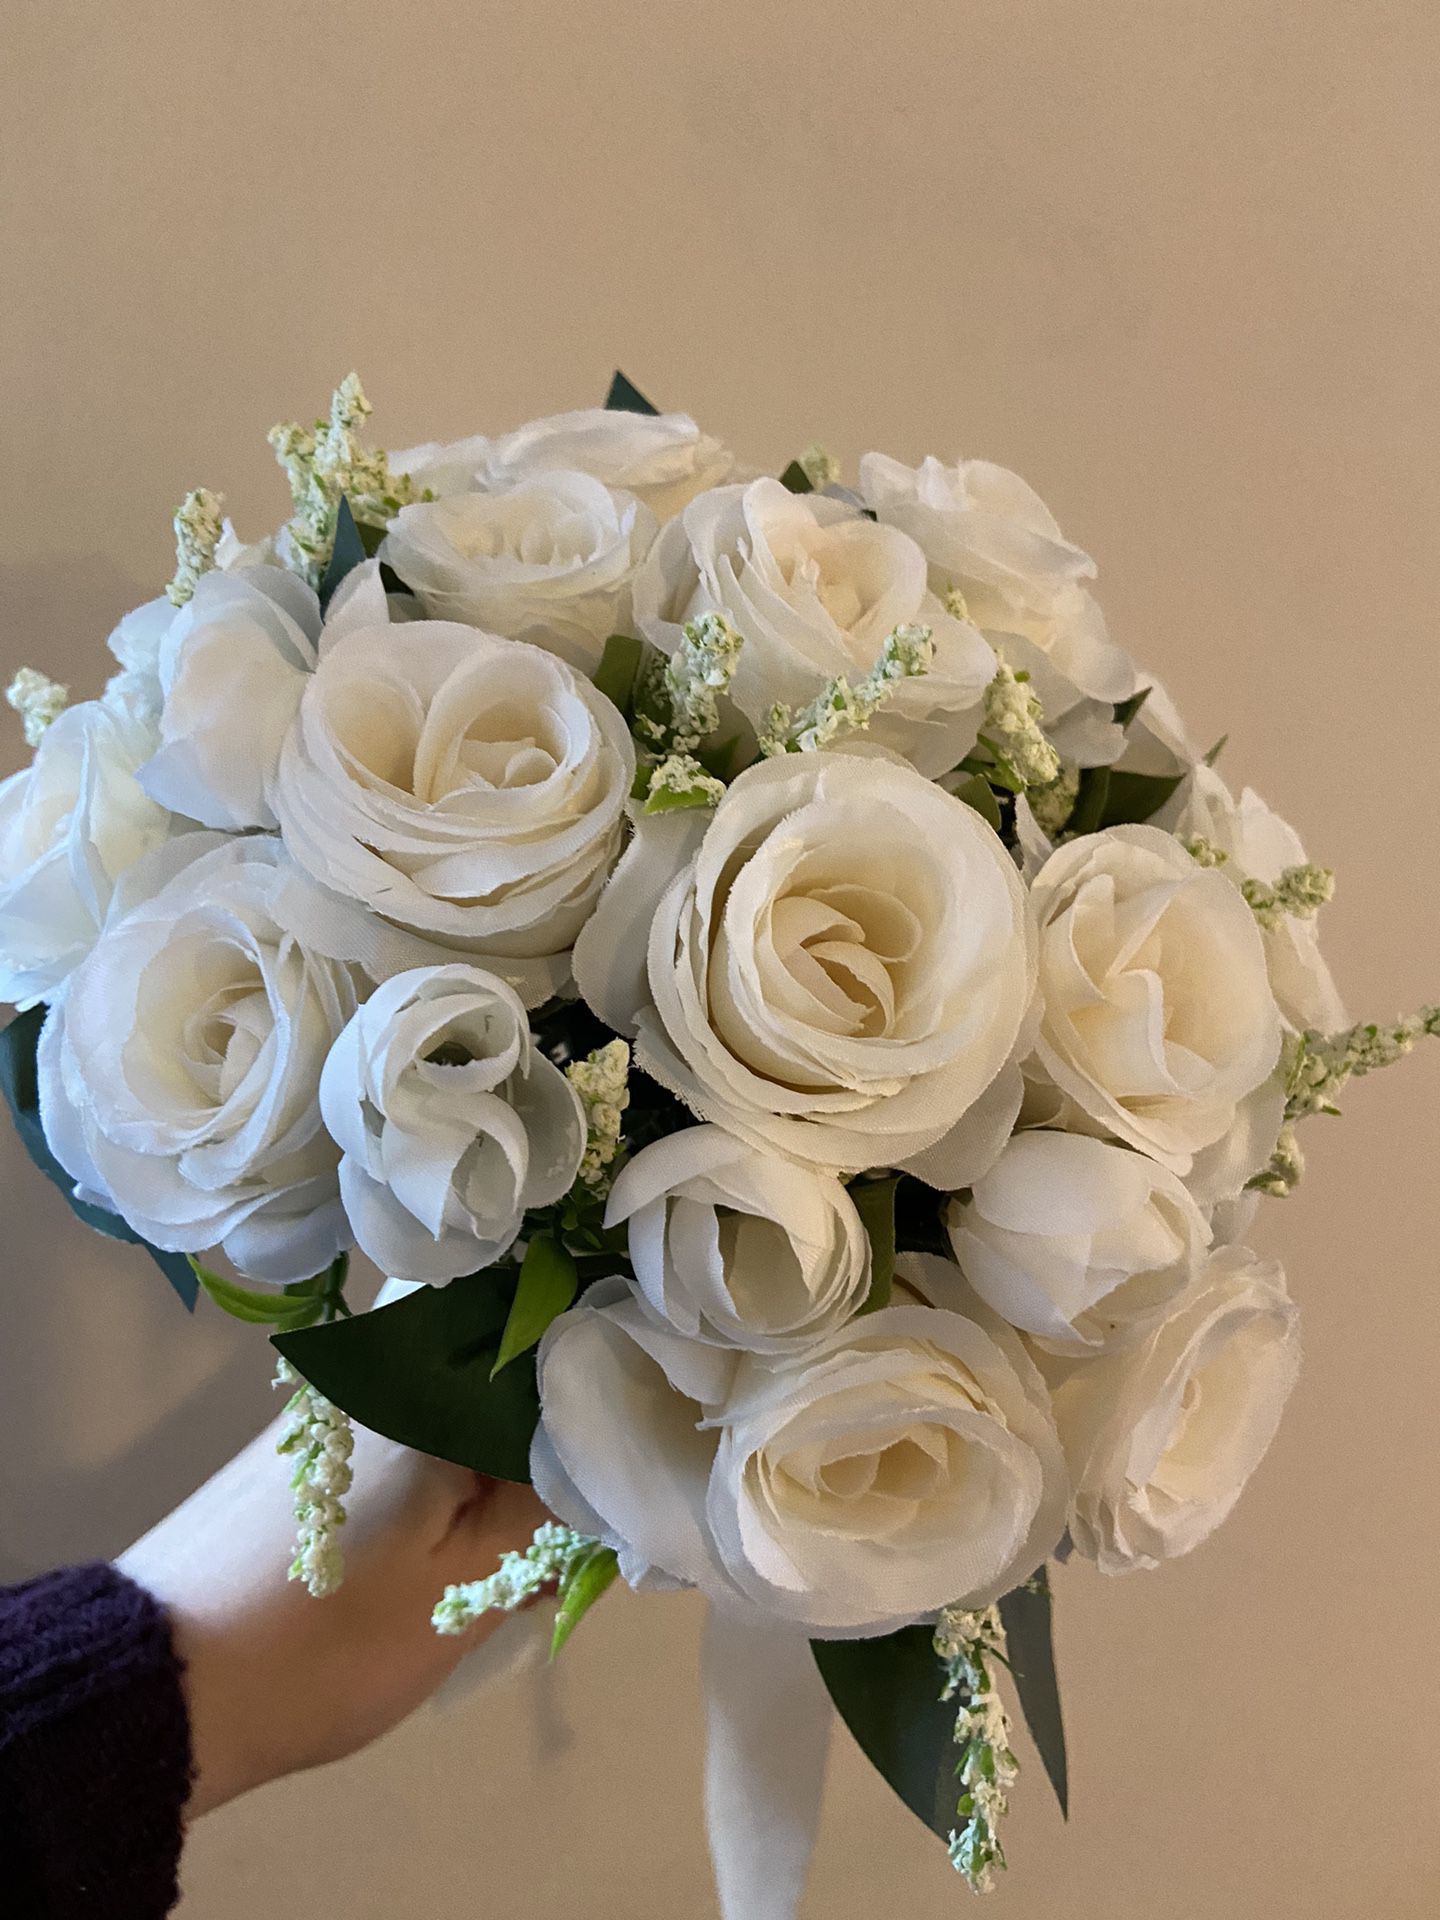 Holding Flowers Artificial Natural Rose Wedding Bouquet with Silk Satin Ribbon Pink White Champagne Bridesmaid Bridal Party Color: white Message me if